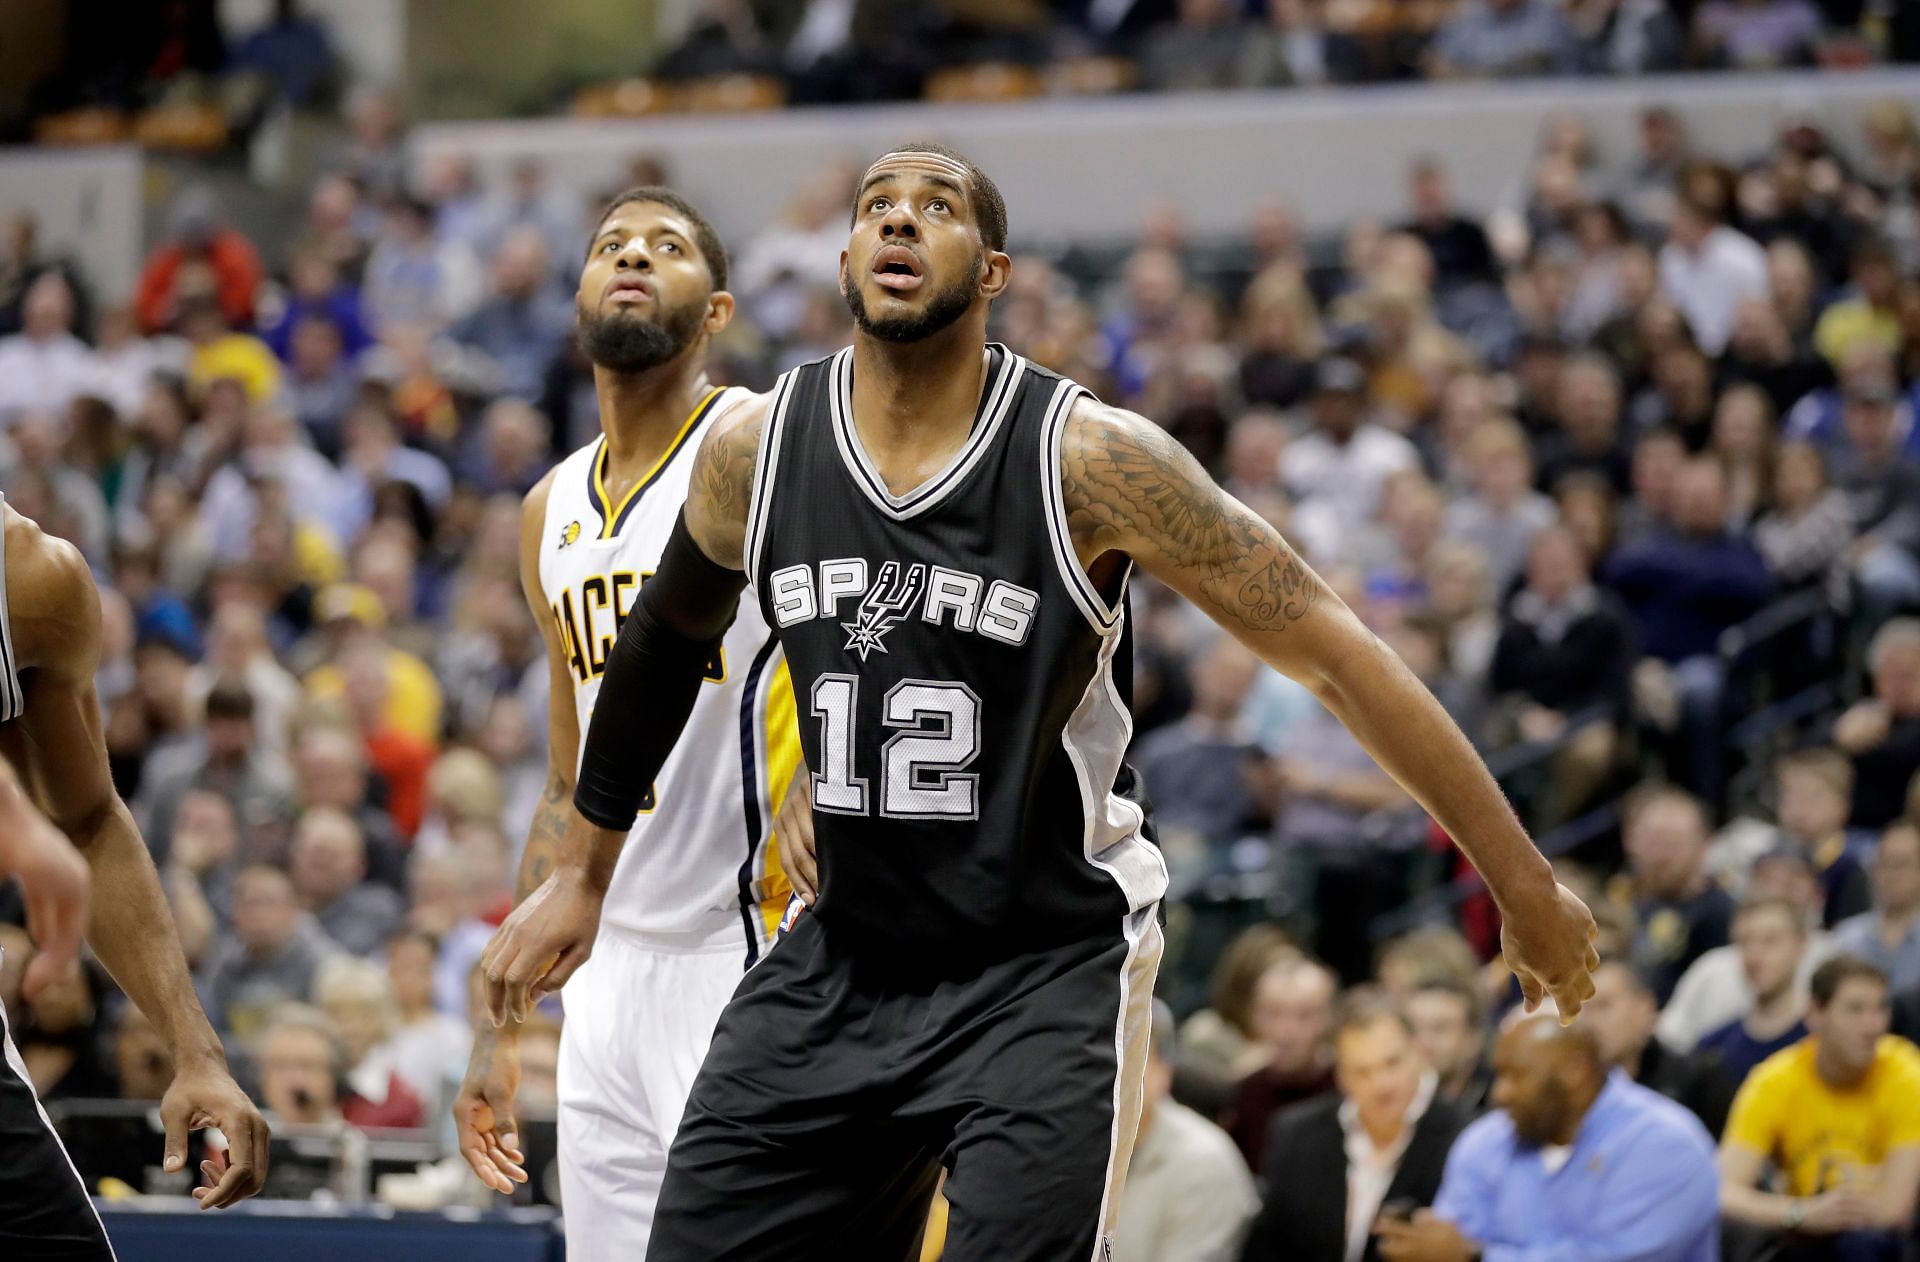 San Antonio Spurs will play the Indiana Pacers on Monday.